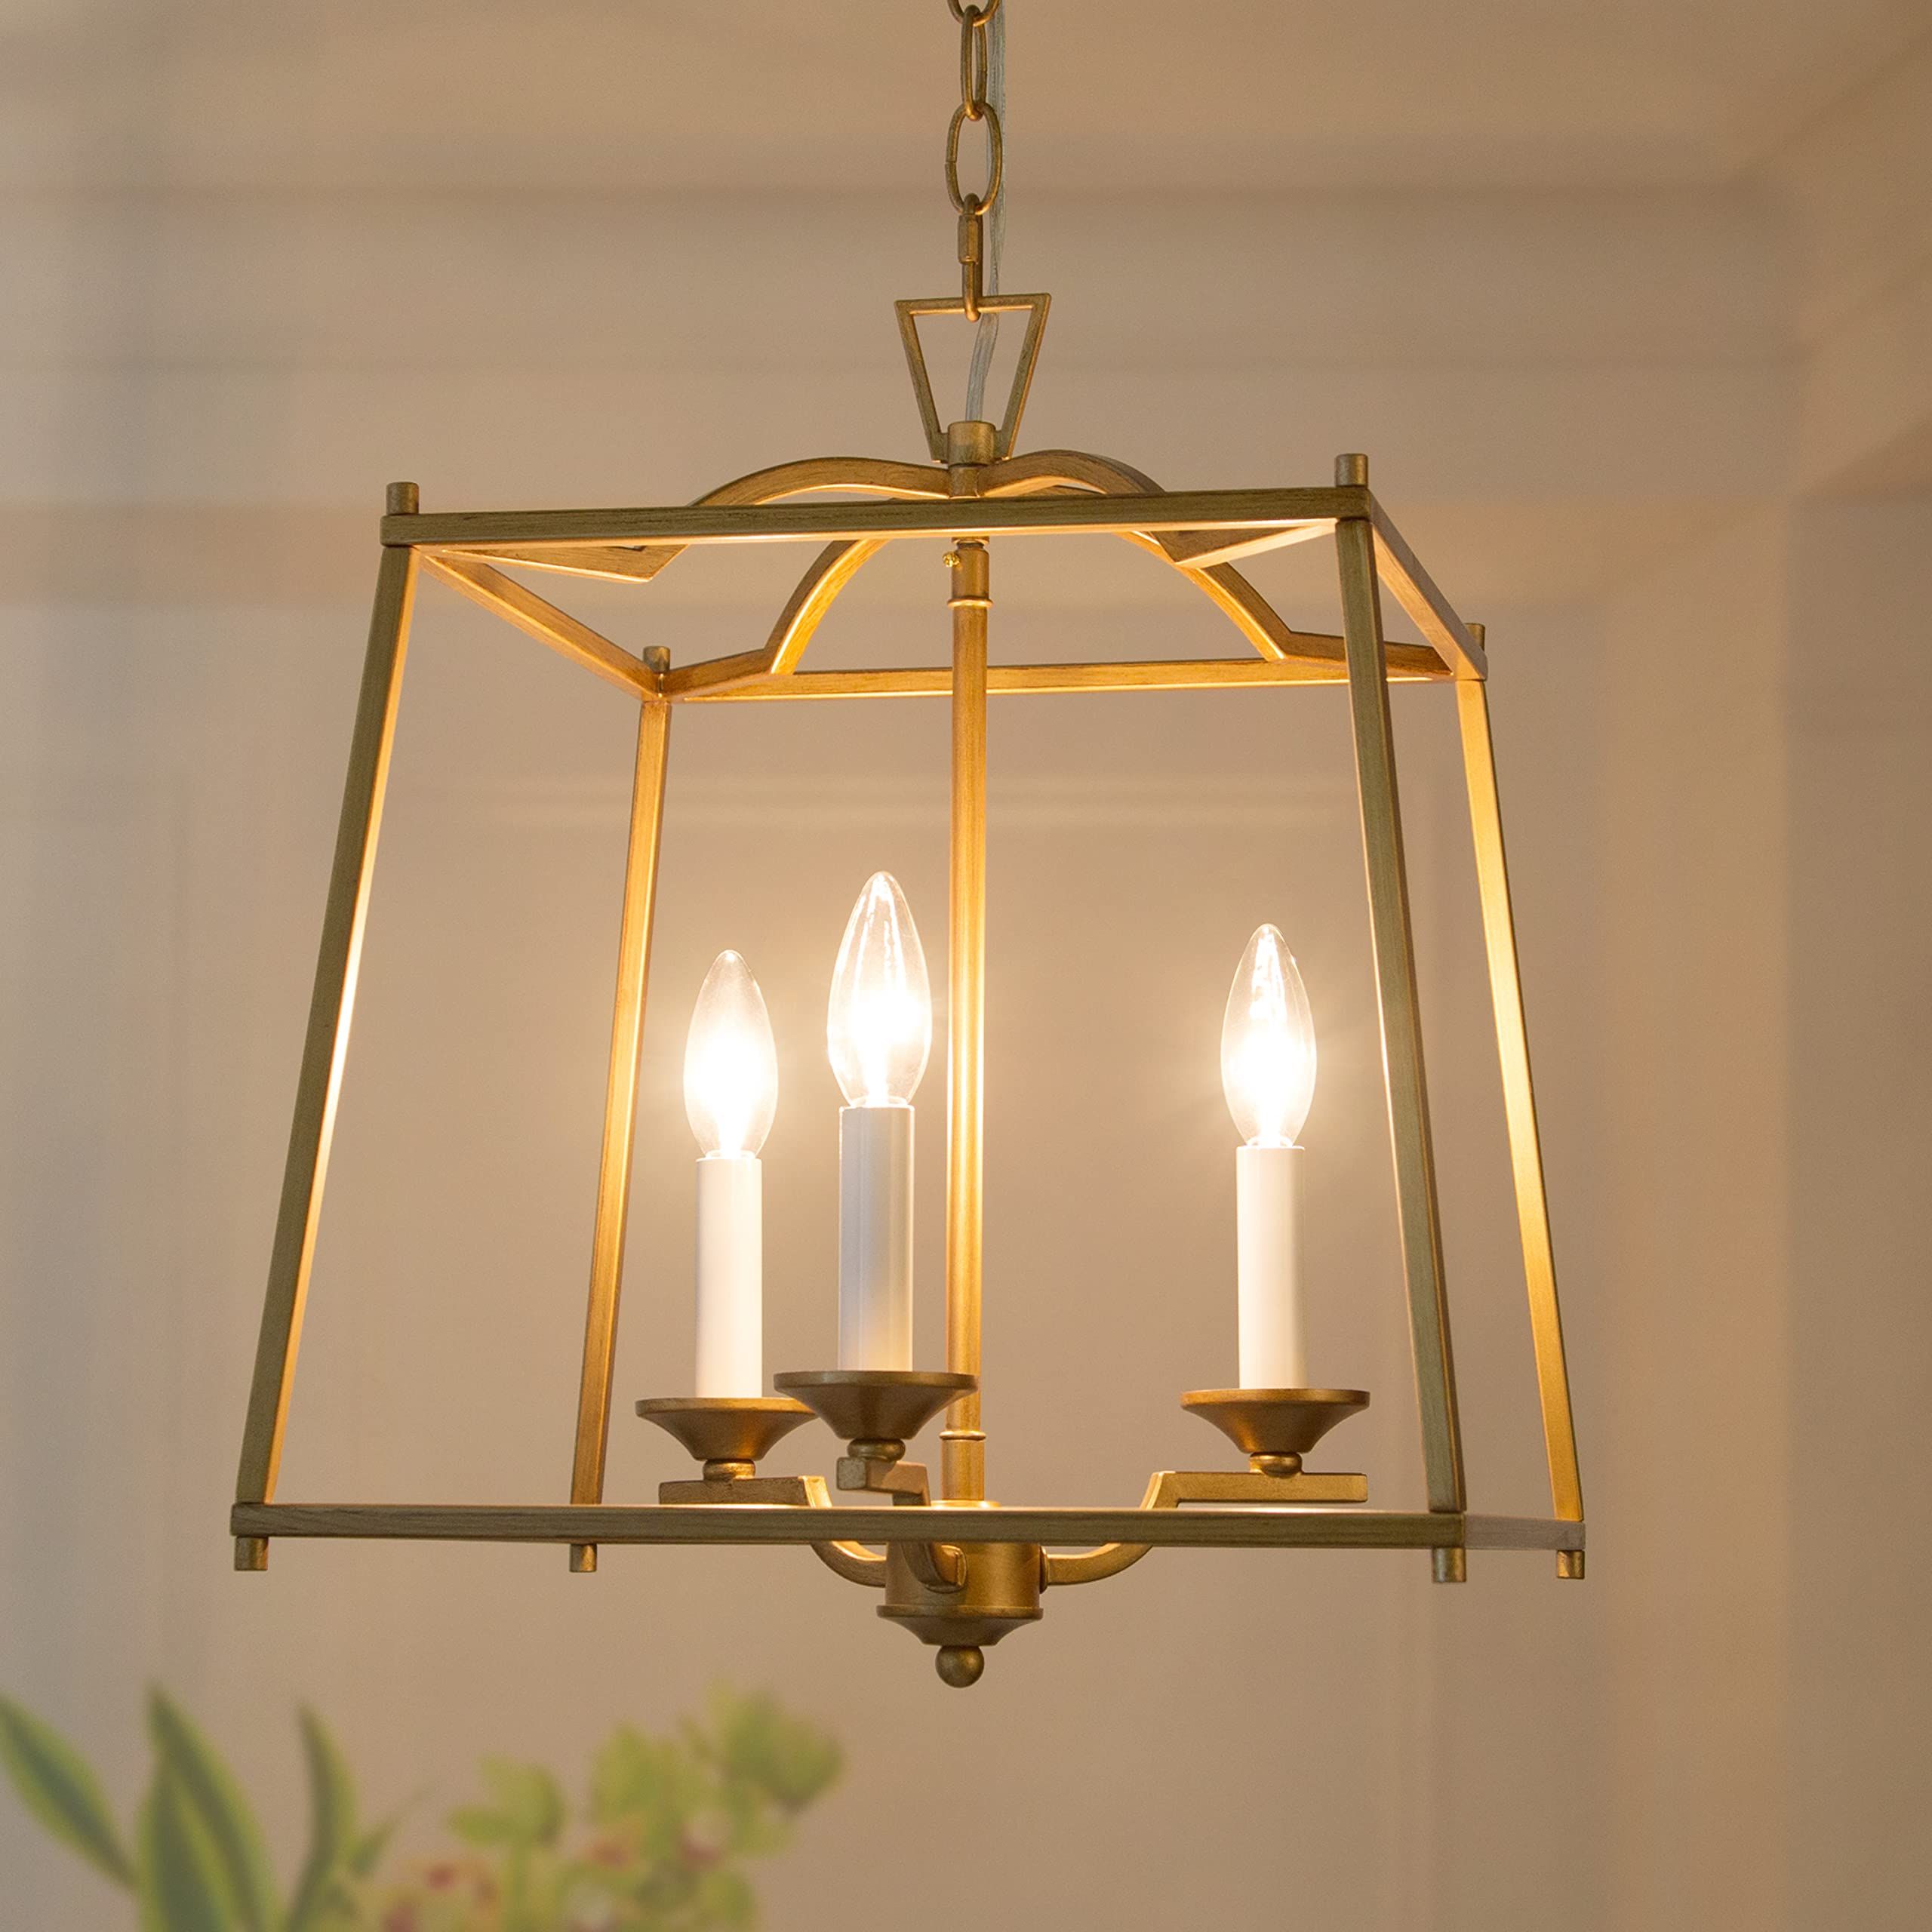 Recent Gold Lantern Chandelier, Gold Pendant Lighting For Kitchen Island With Antique  Gold Finish, Foyer Hanging Light Fixture For Dining Room, Entryway,  Kitchen,  (View 2 of 15)